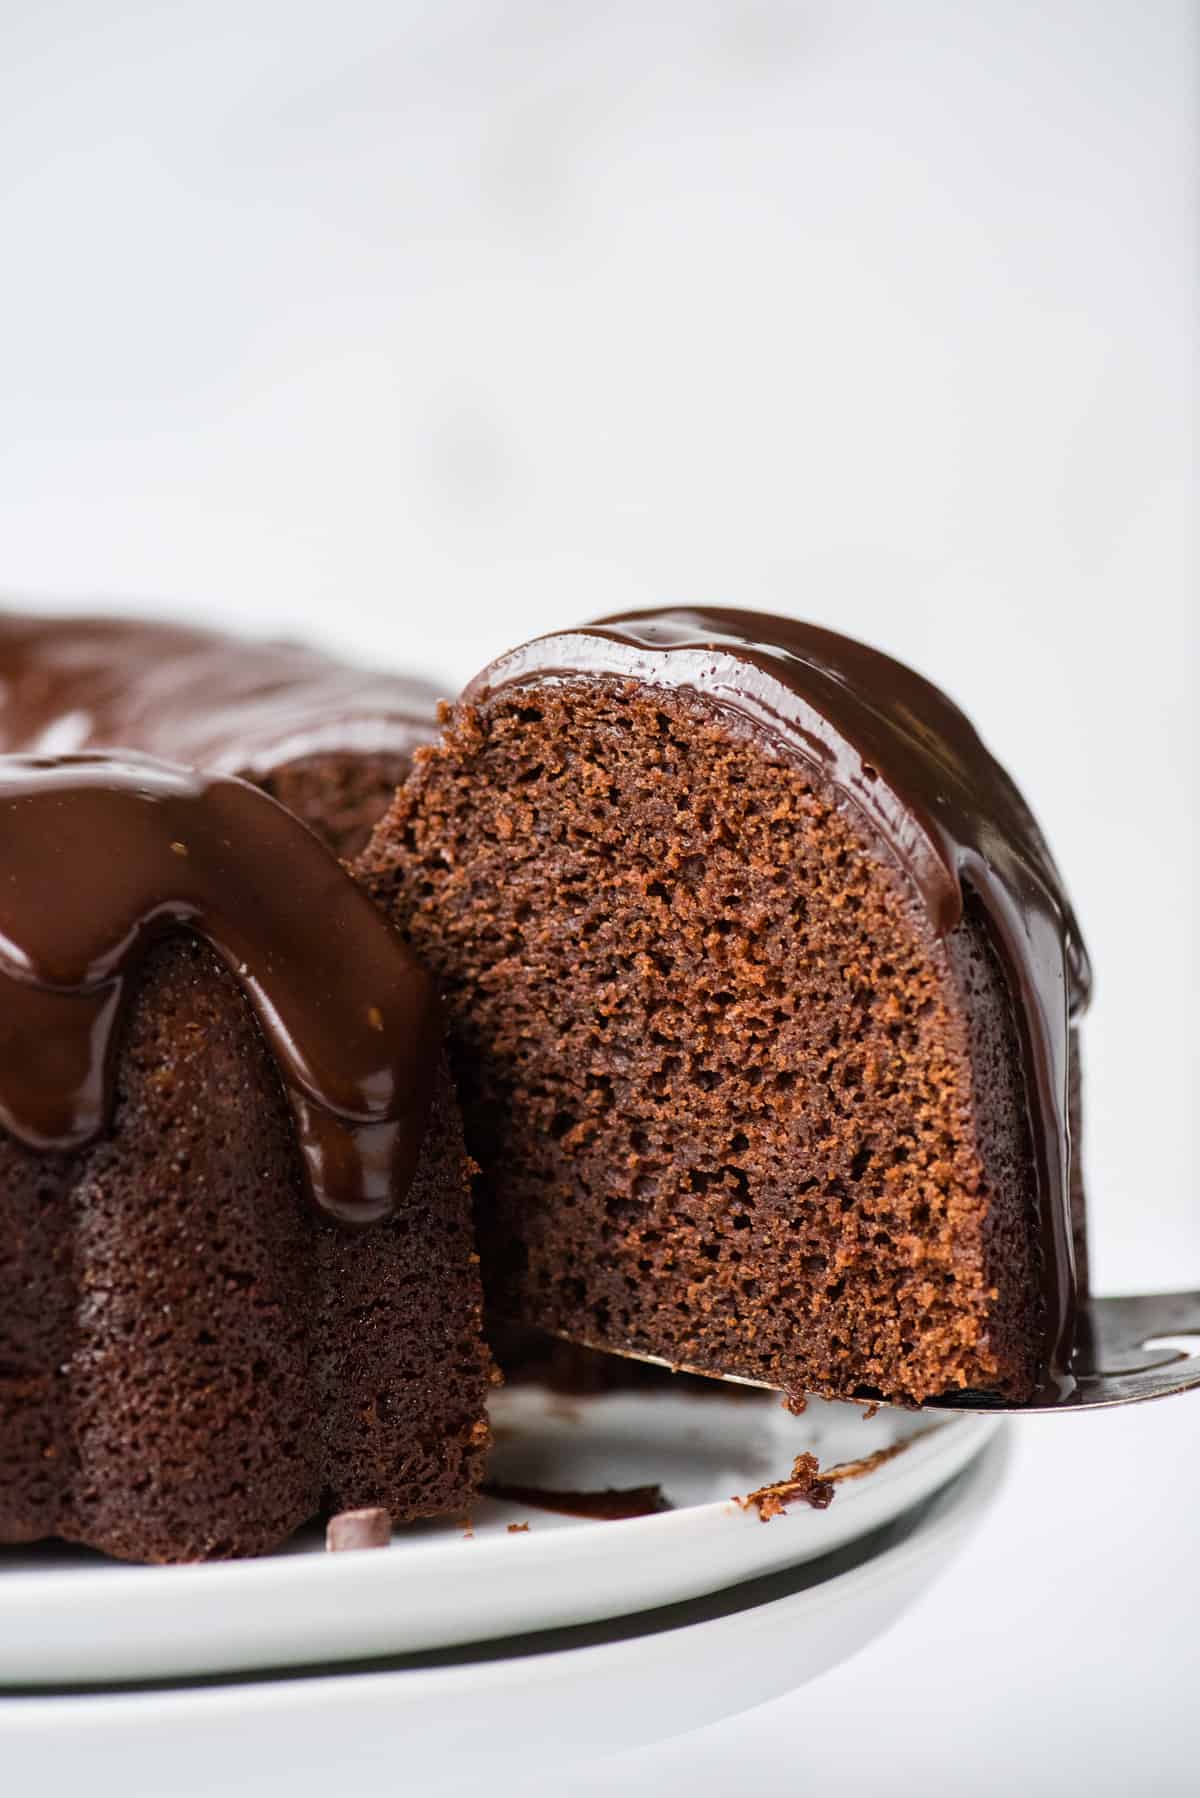 slice of chocolate bundt cake with chocolate glaze being removed from the cake on metal spatula on white background